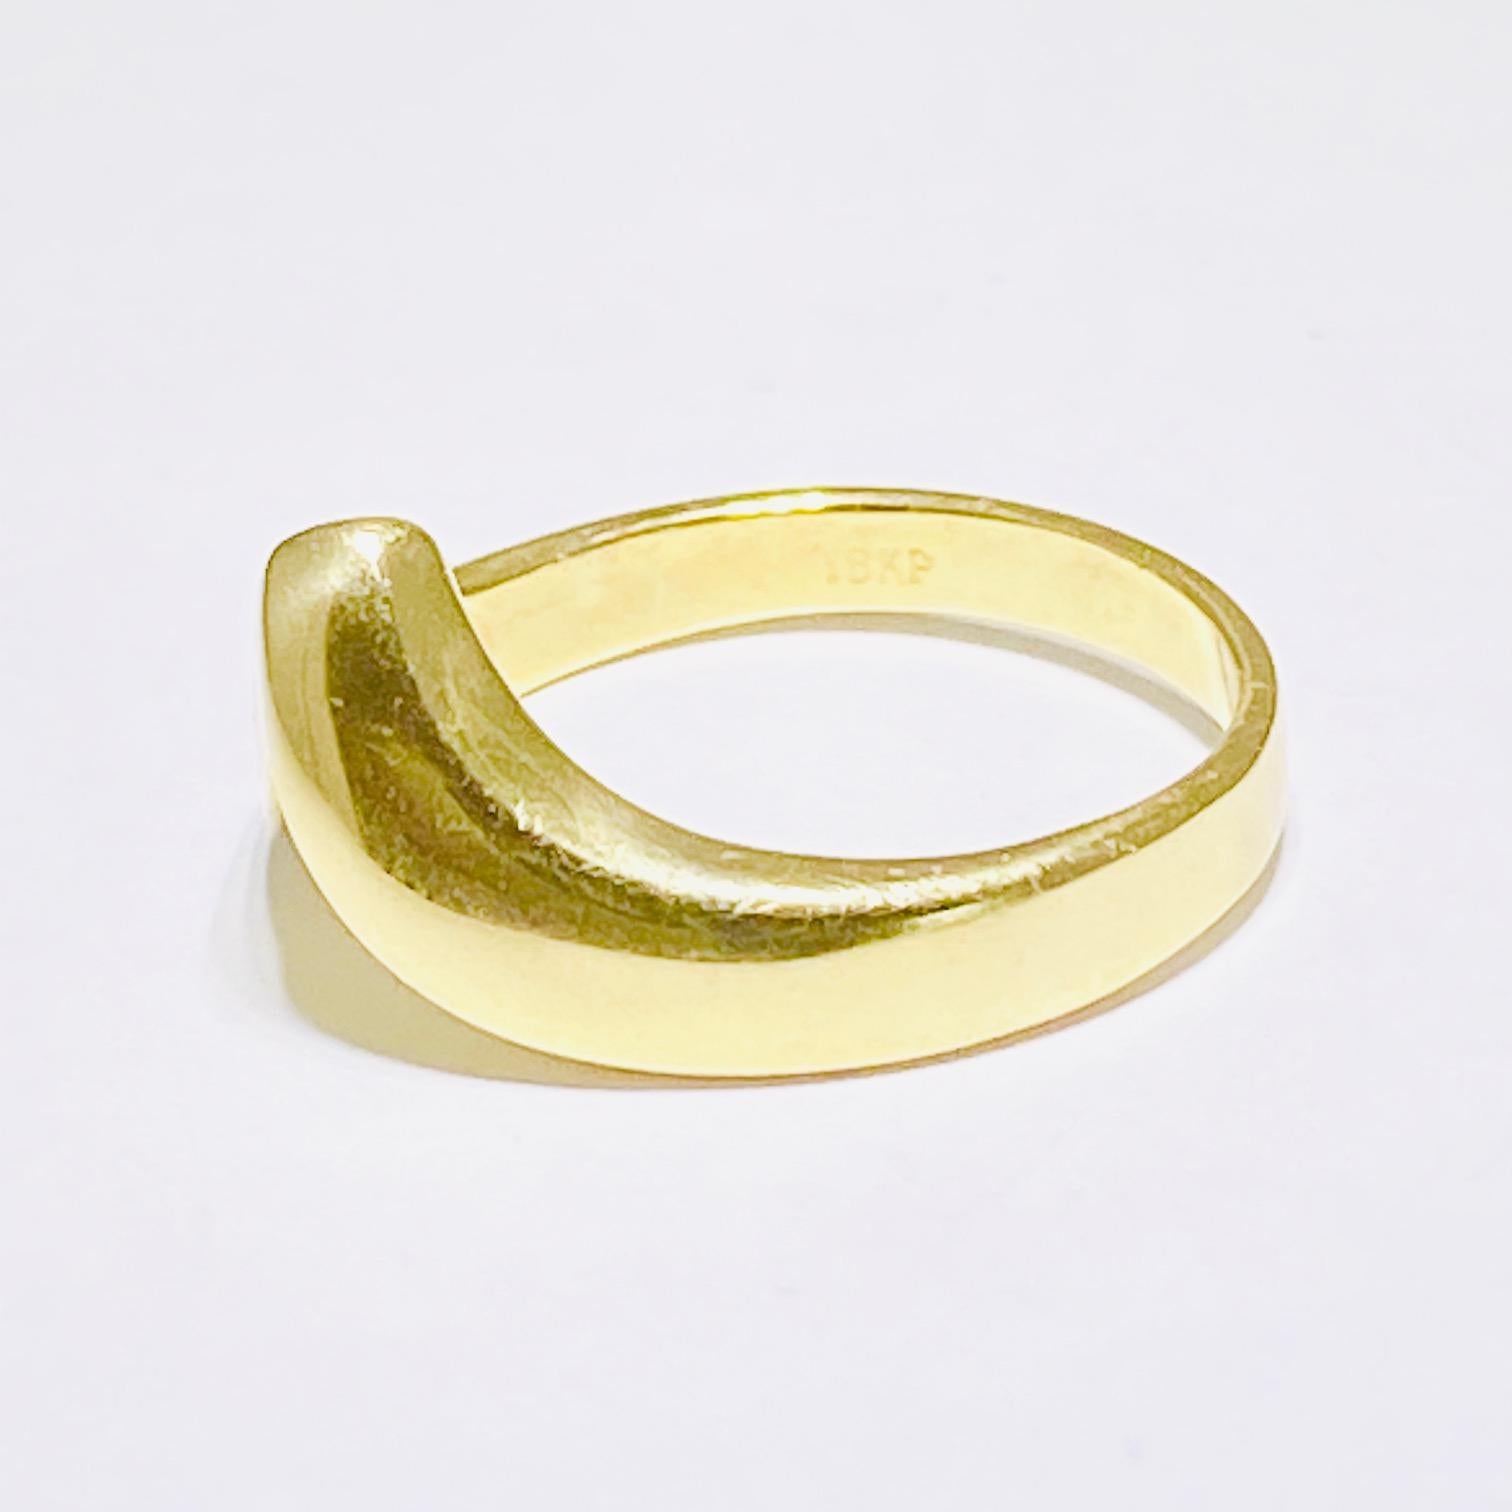 This ring is a classy piece that is super versatile! This ring has a gorgeous 